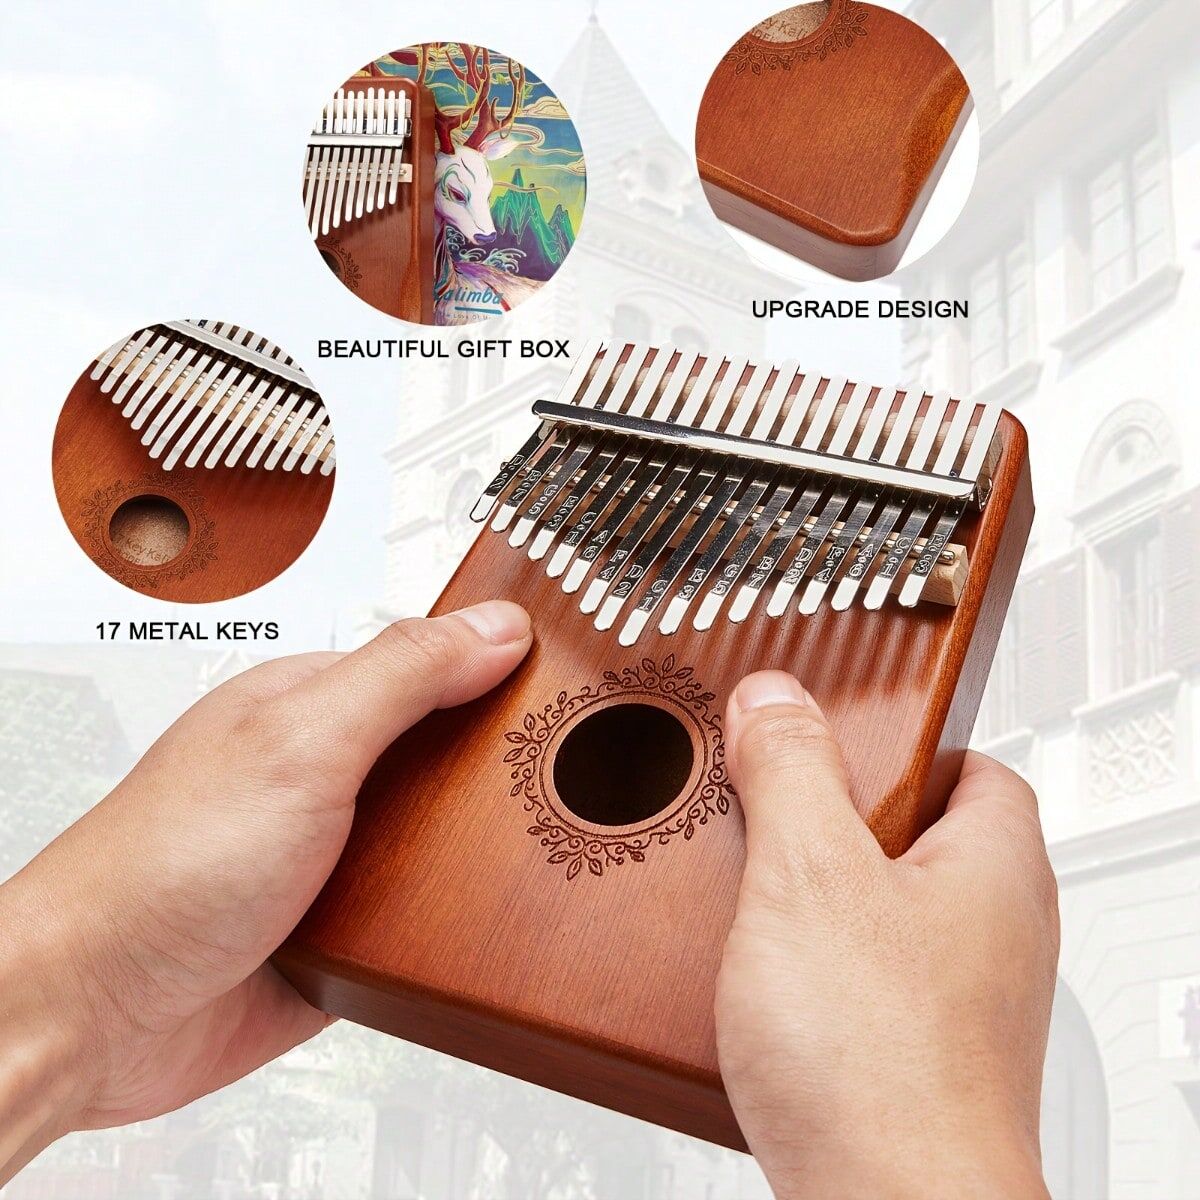 SHEIN Kalimba Thumb Piano 21 Keys Thumbsticks Organs Beginners Musical Instruments Musical Instruments Gift,Christmas And Halloween Gift,Thanksgiving Gift Brown 18*12.7*11.43cm